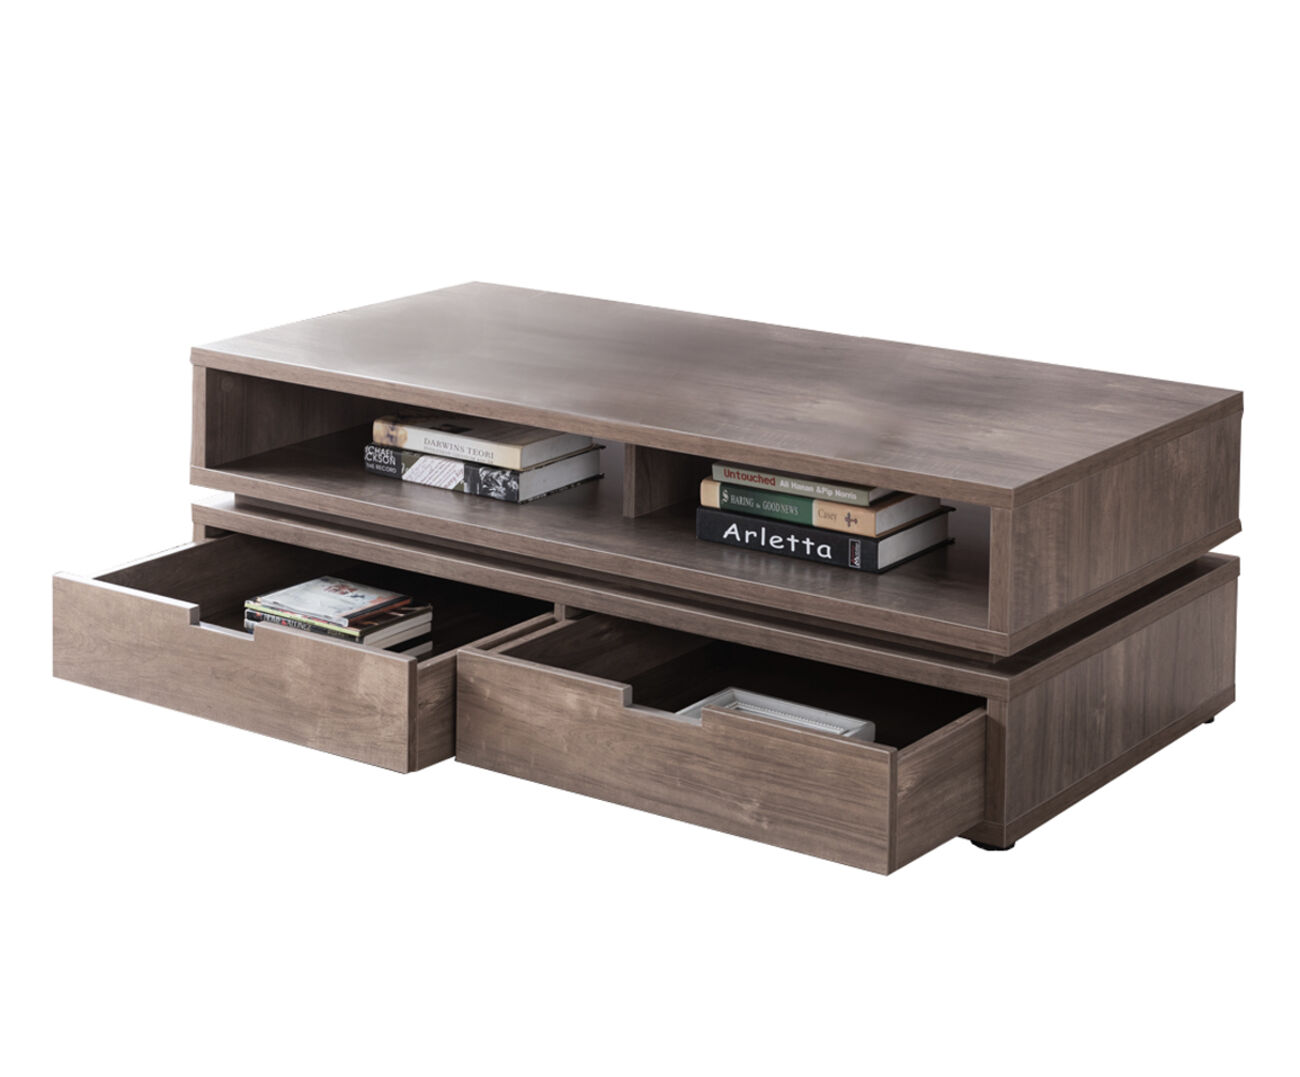 2 Drawer Rectangular Wooden Coffee Table with 2 Open Shelves, Brown